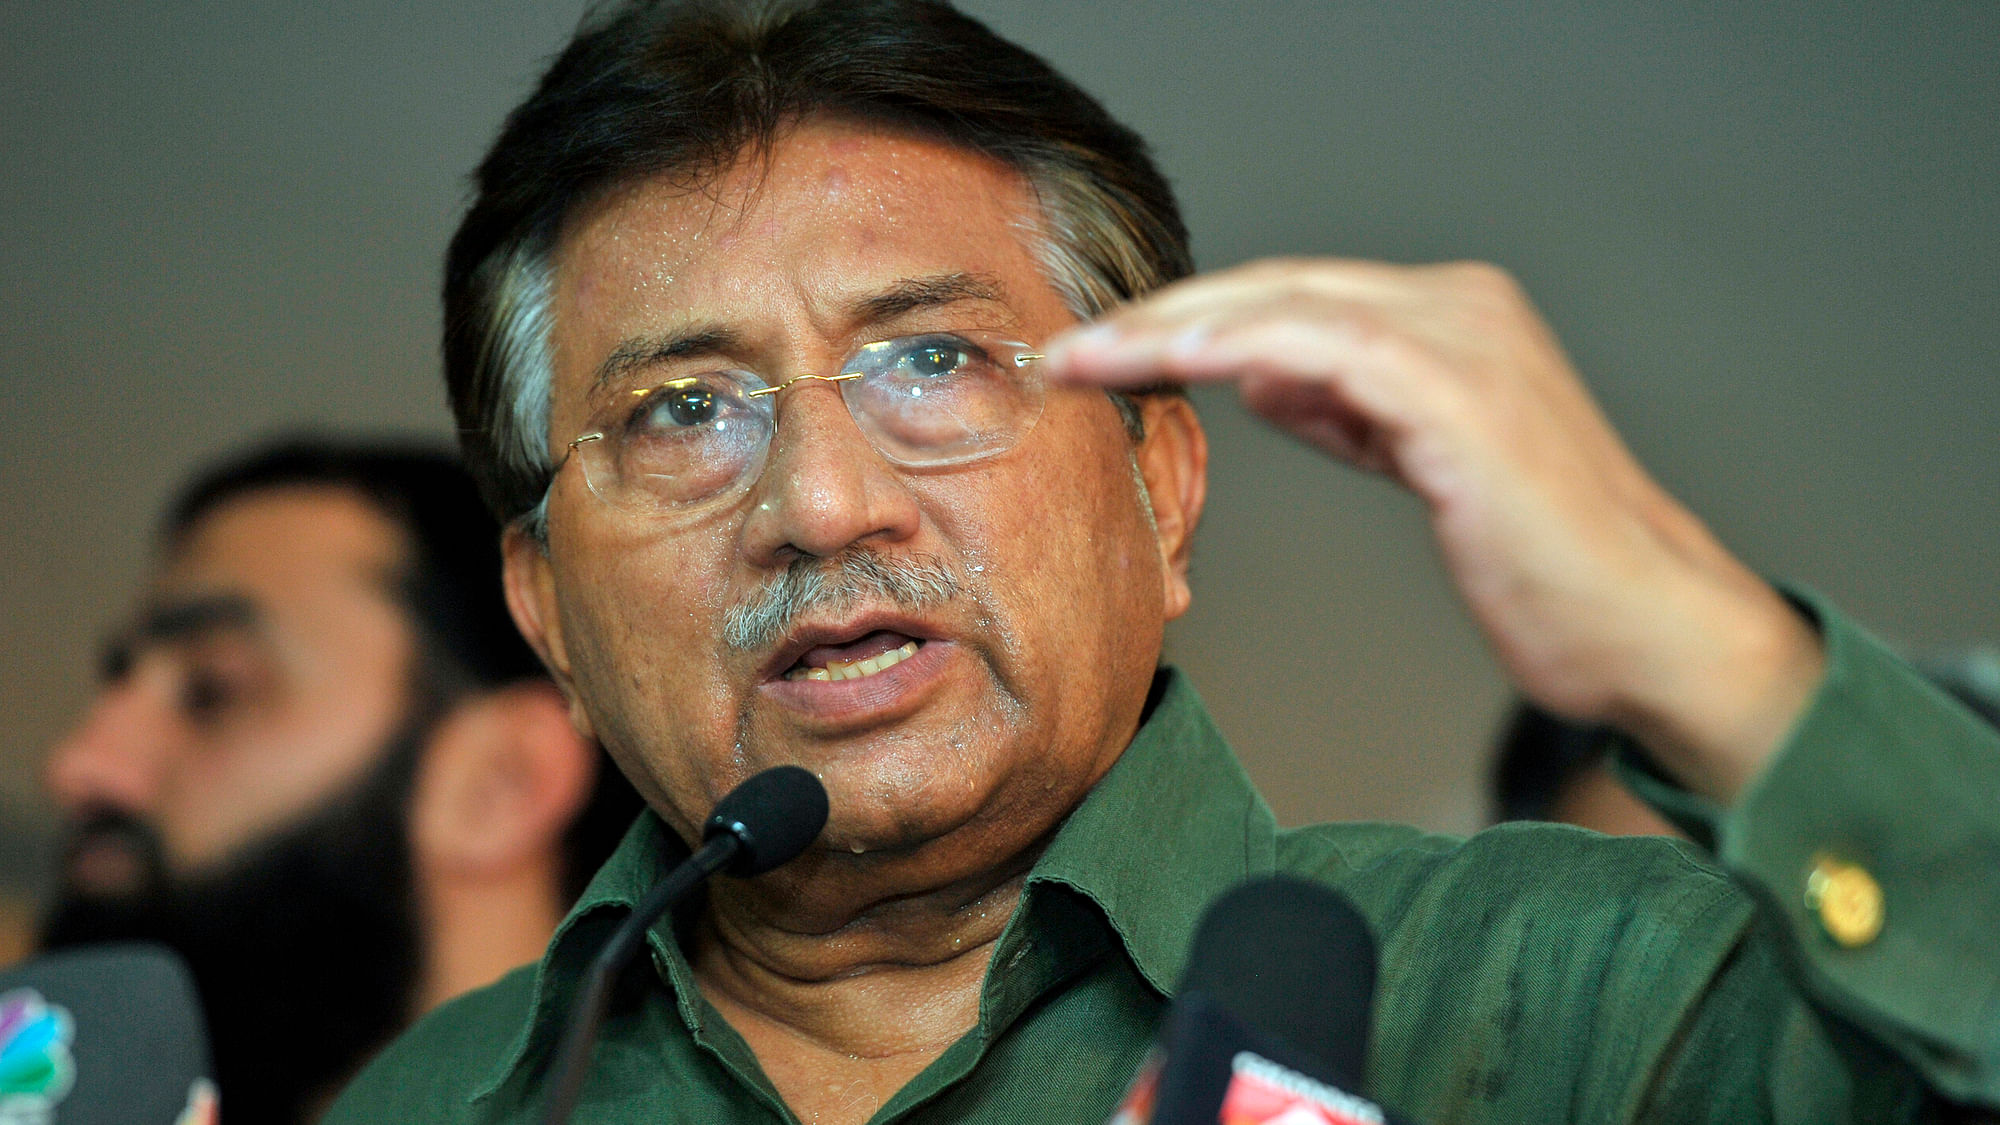  Pakistan’s former President Pervez Musharraf speaks during a news conference in Dubai in 2013. (Photo: Reuters)